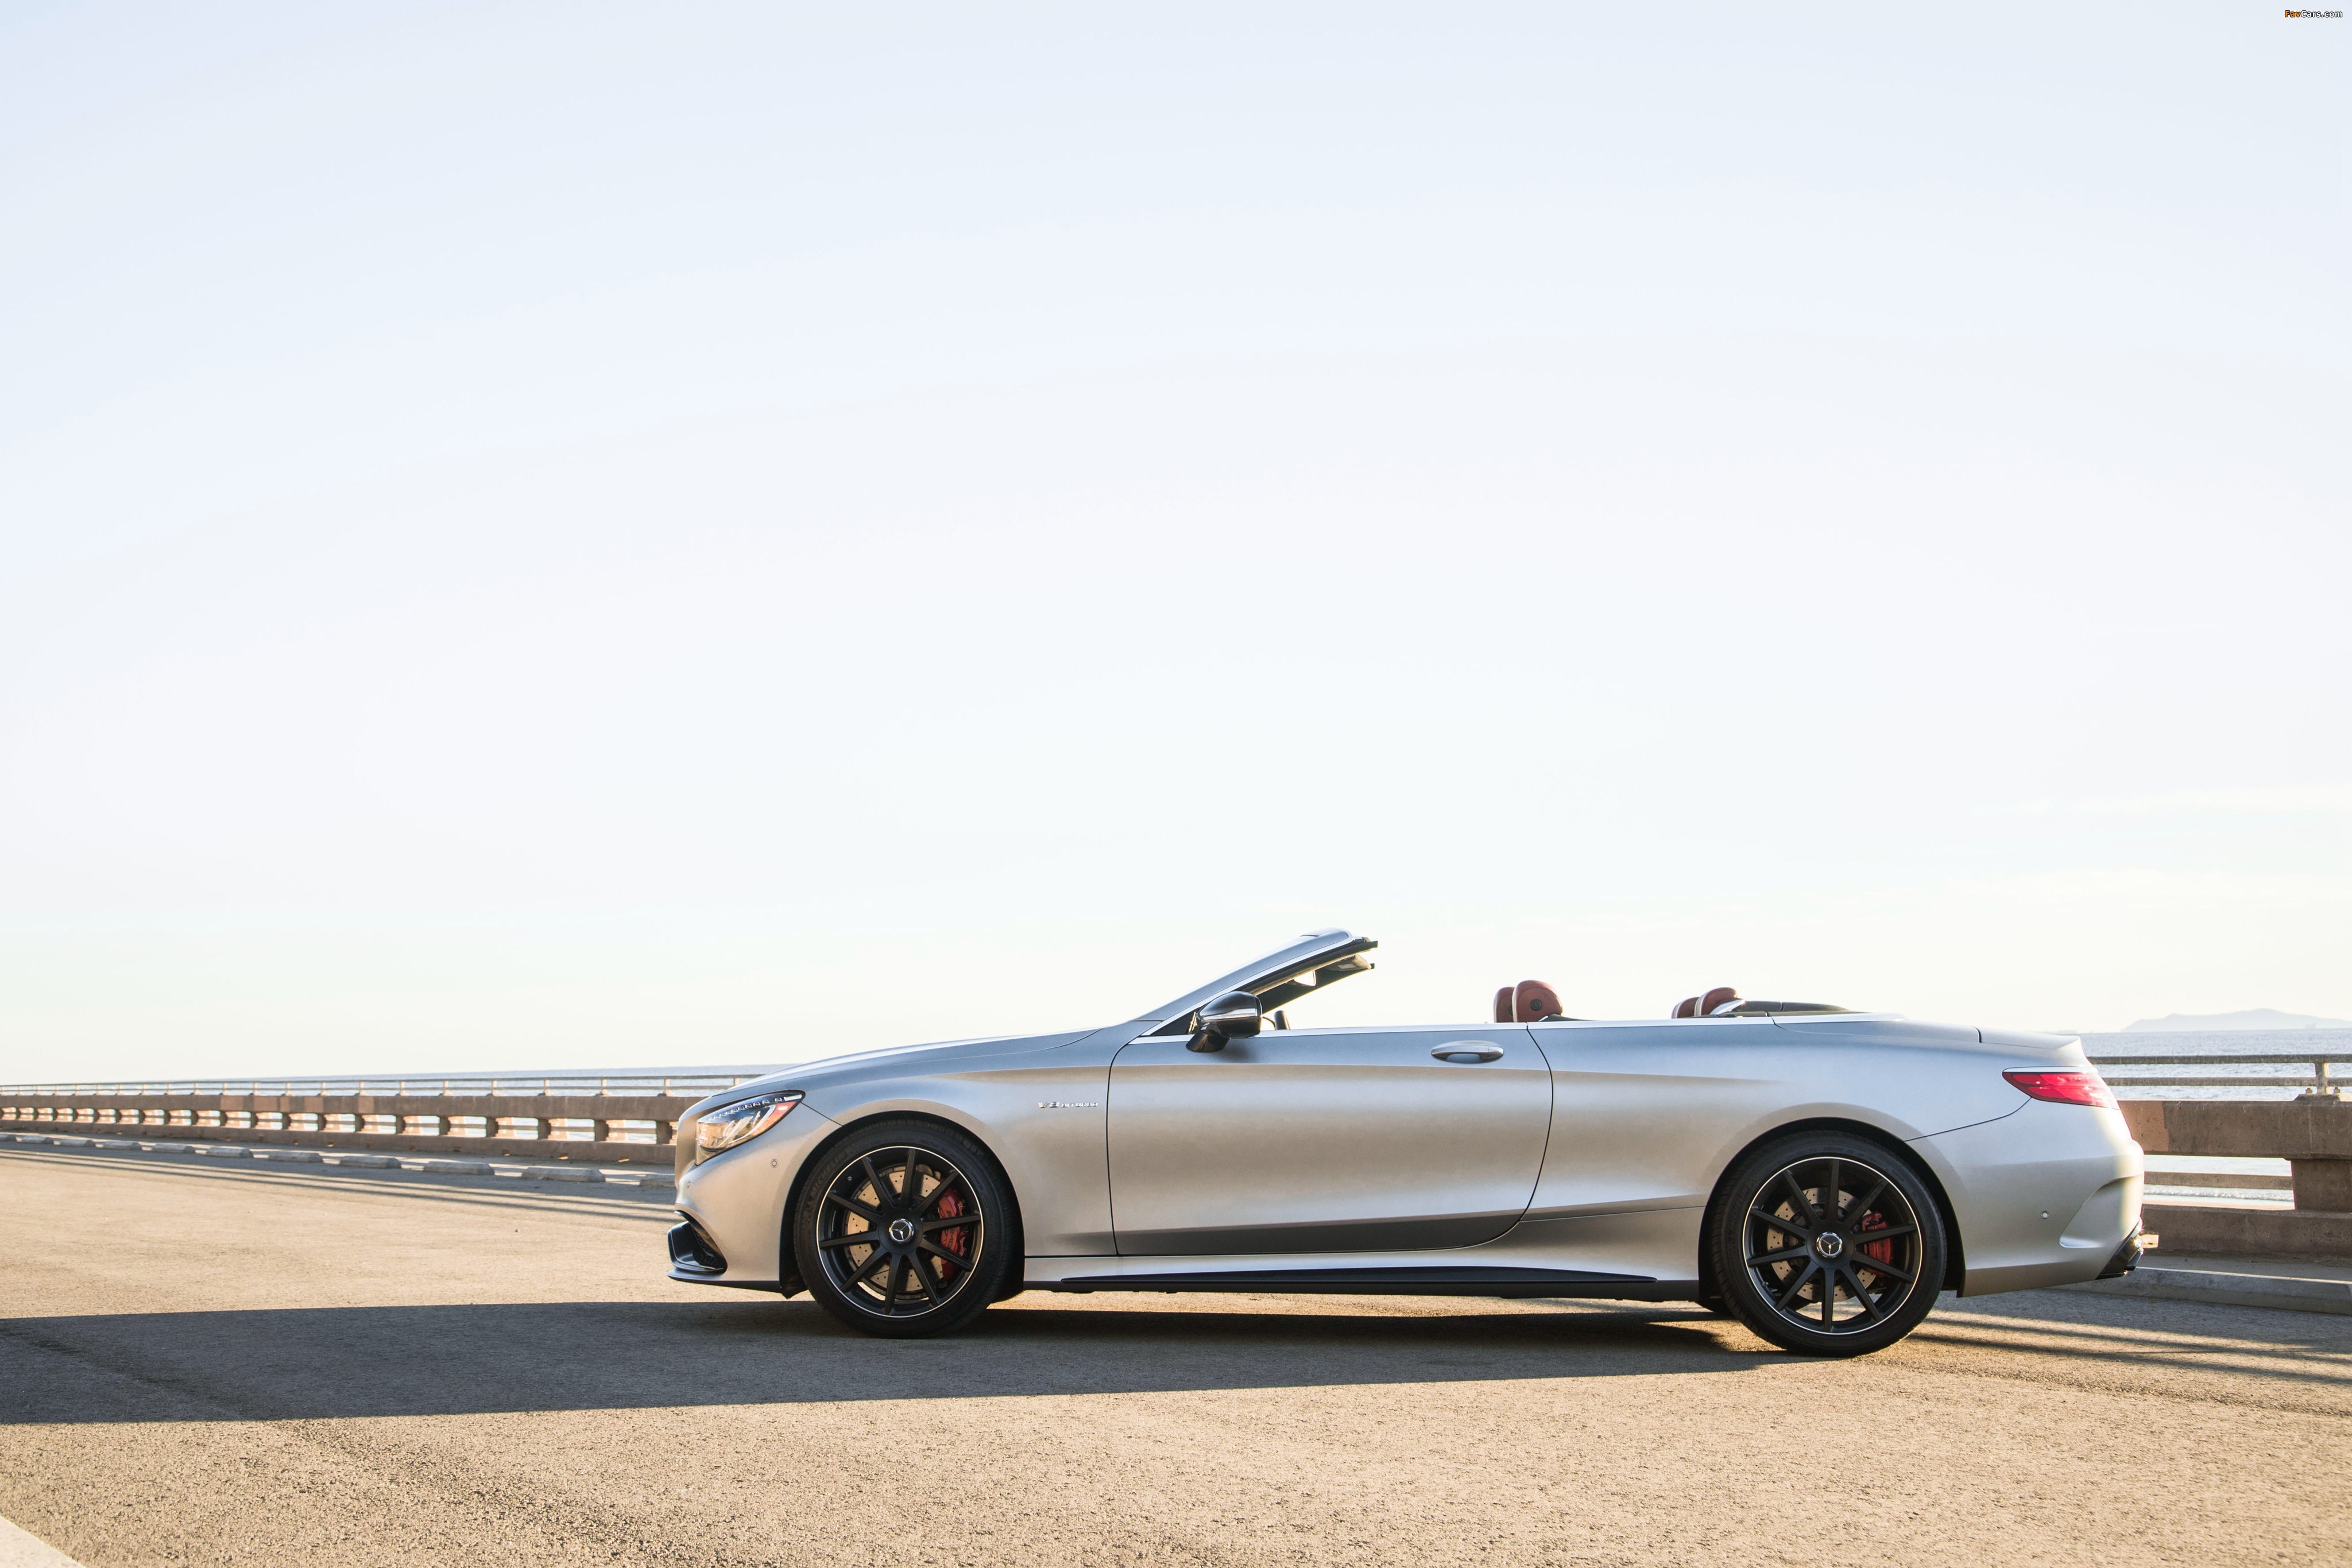 Mercedes-AMG S 63 Cabriolet North America (A217) 2016 pictures (4096 x 2731)